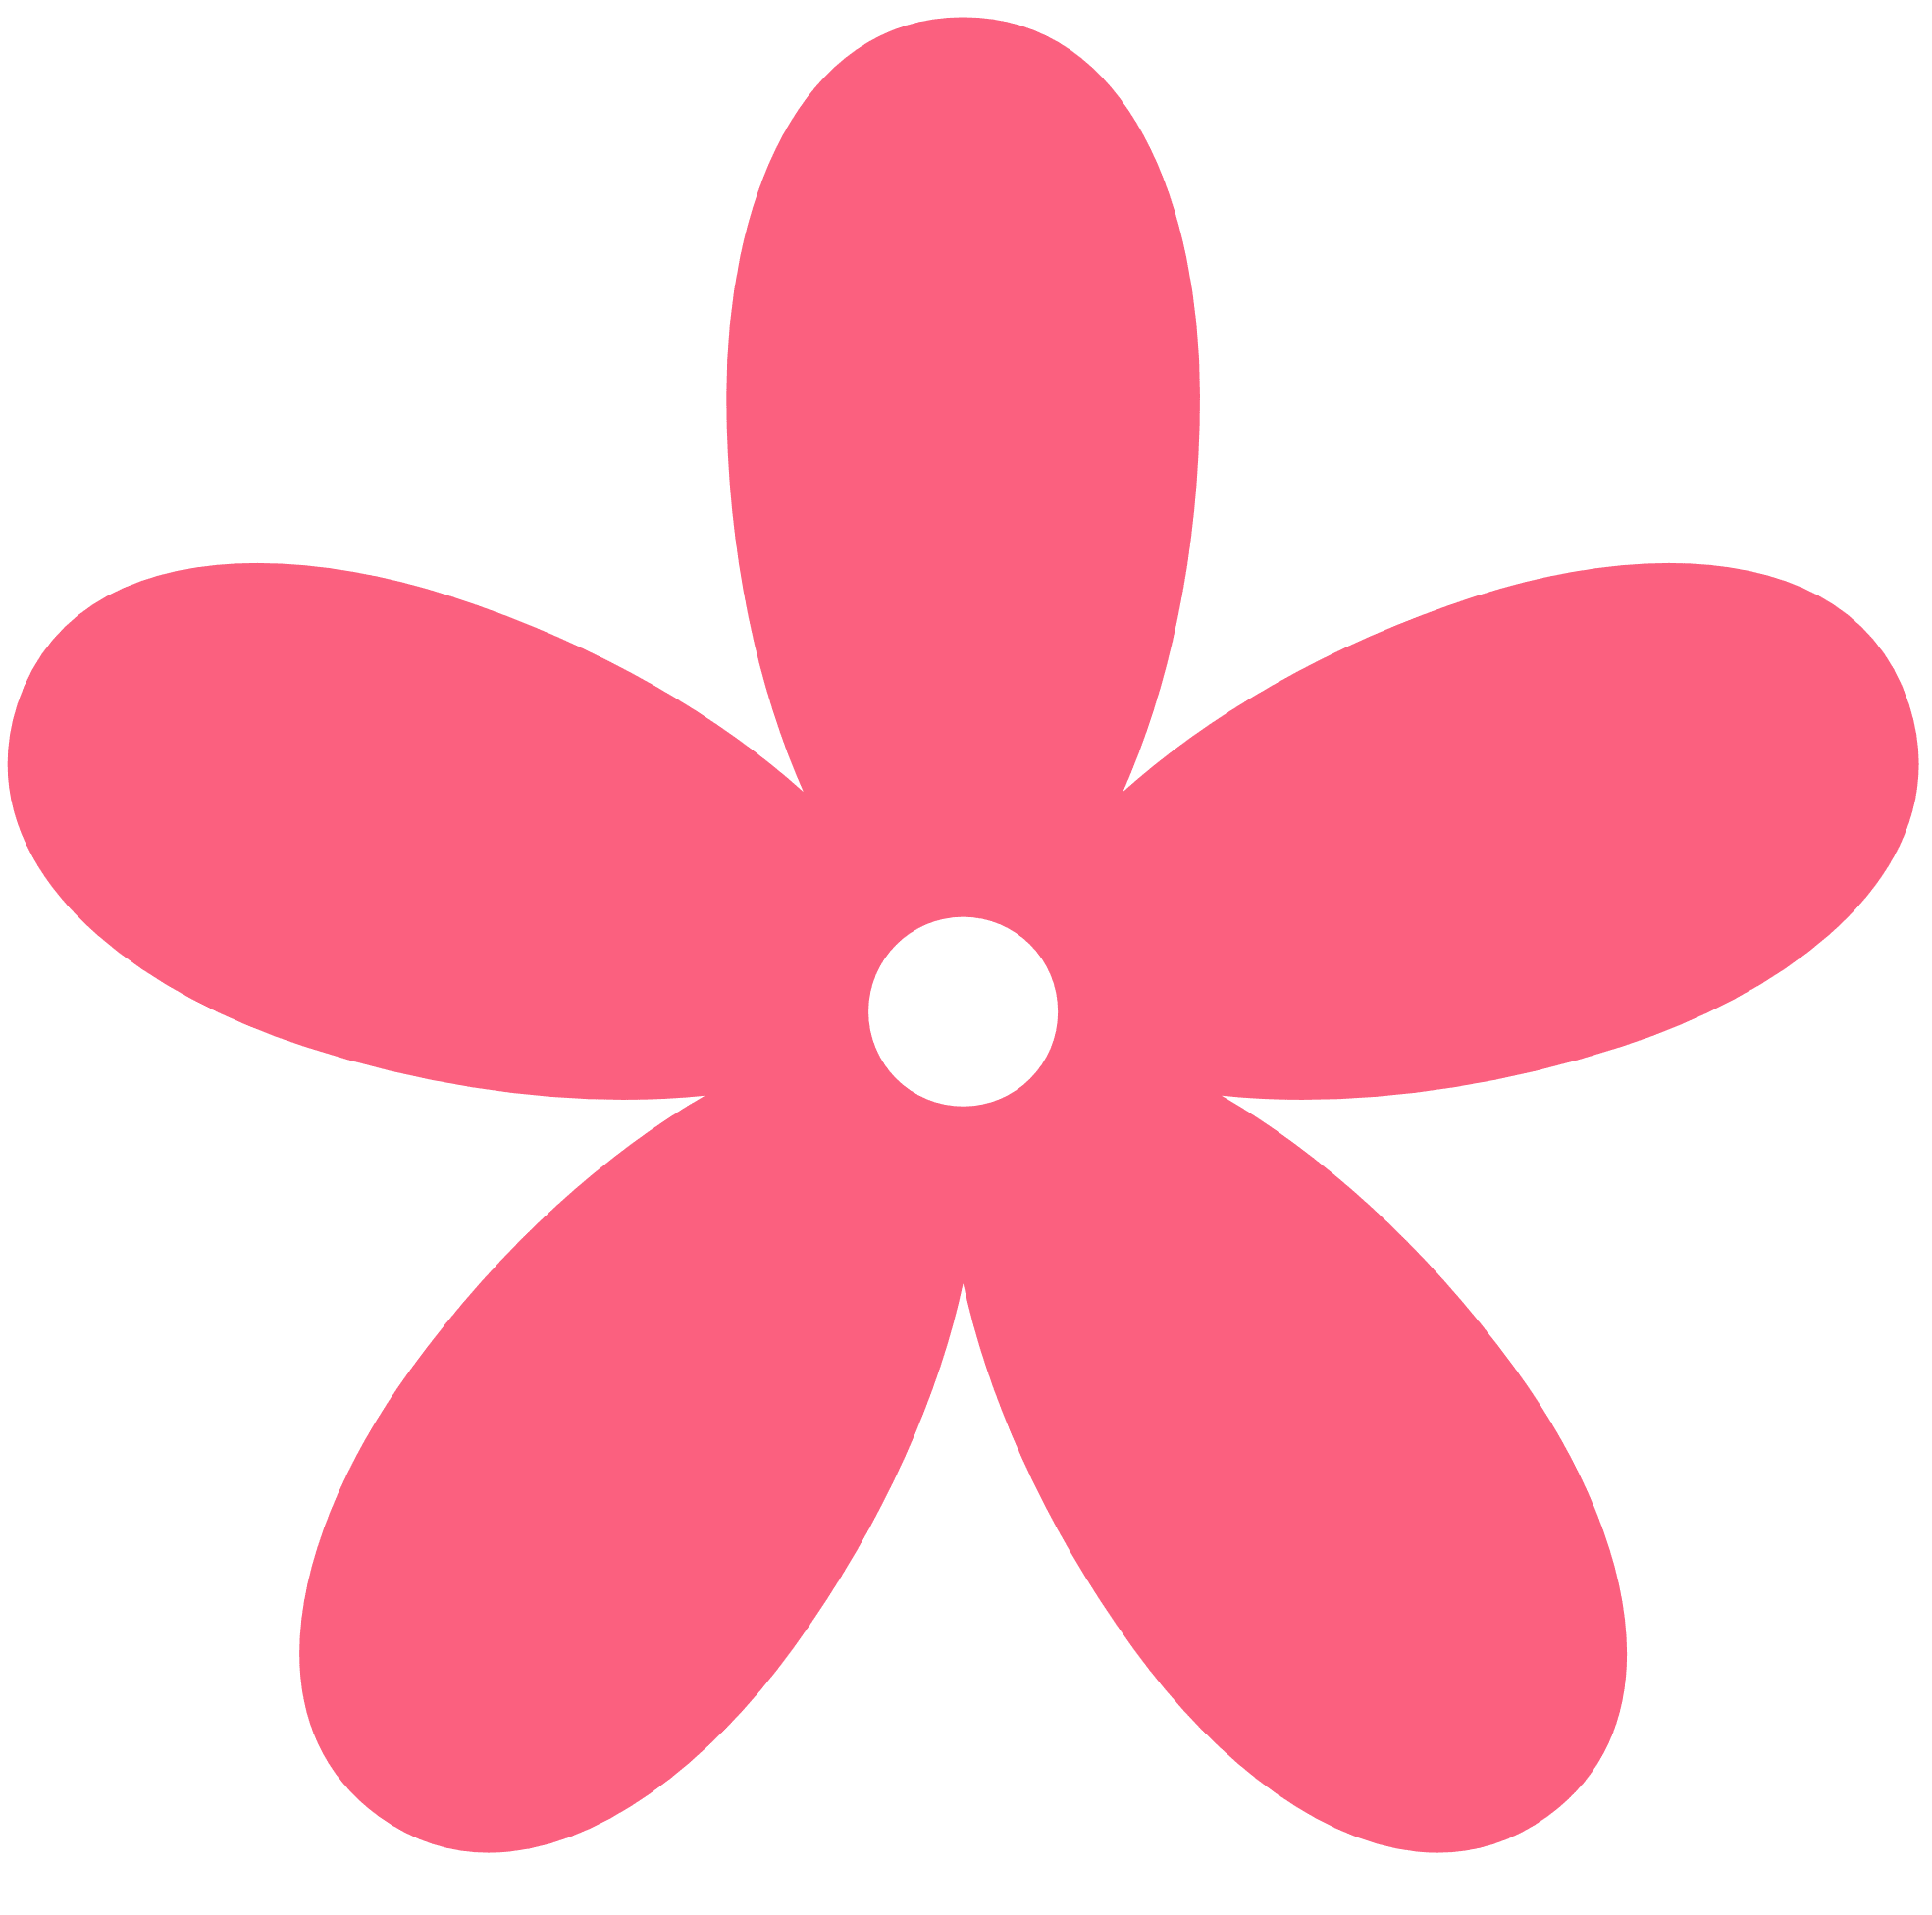 Pink flower clipart image